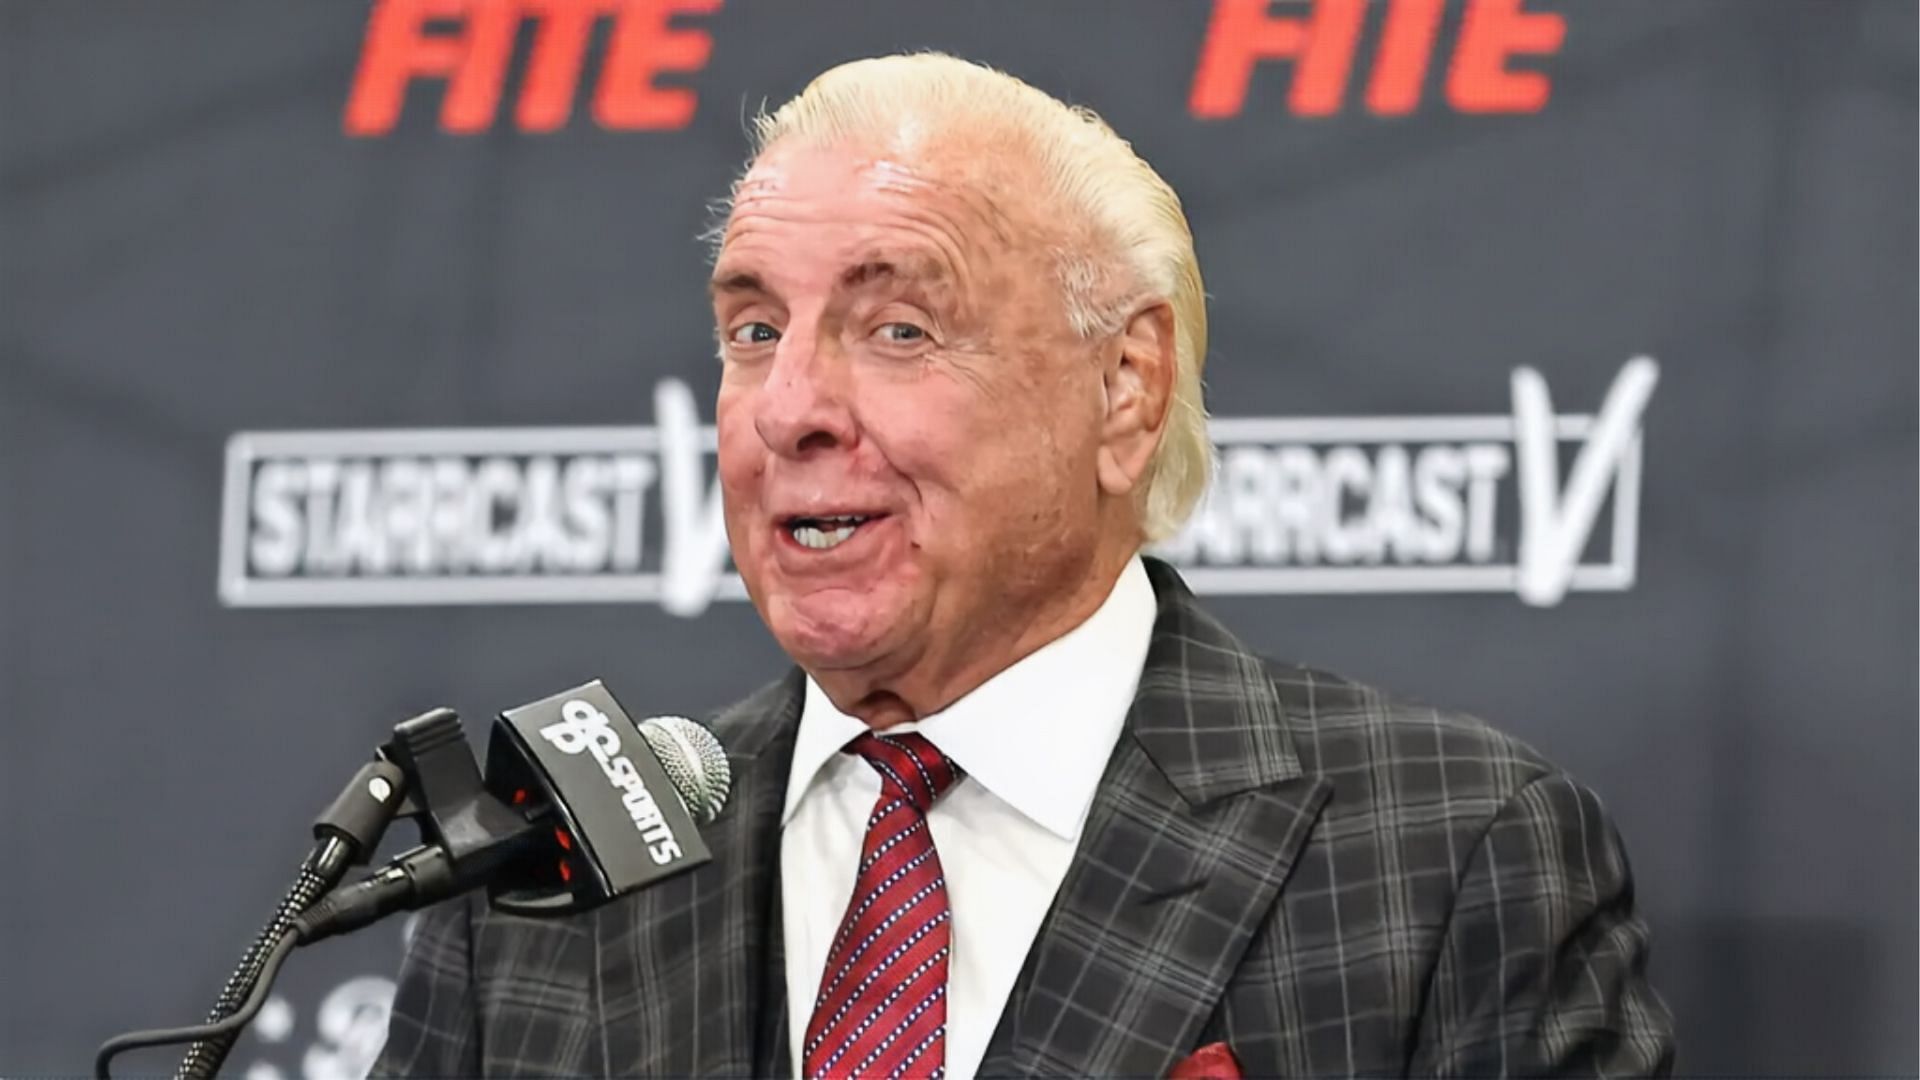 Ric Flair recently joined All Elite Wrestling